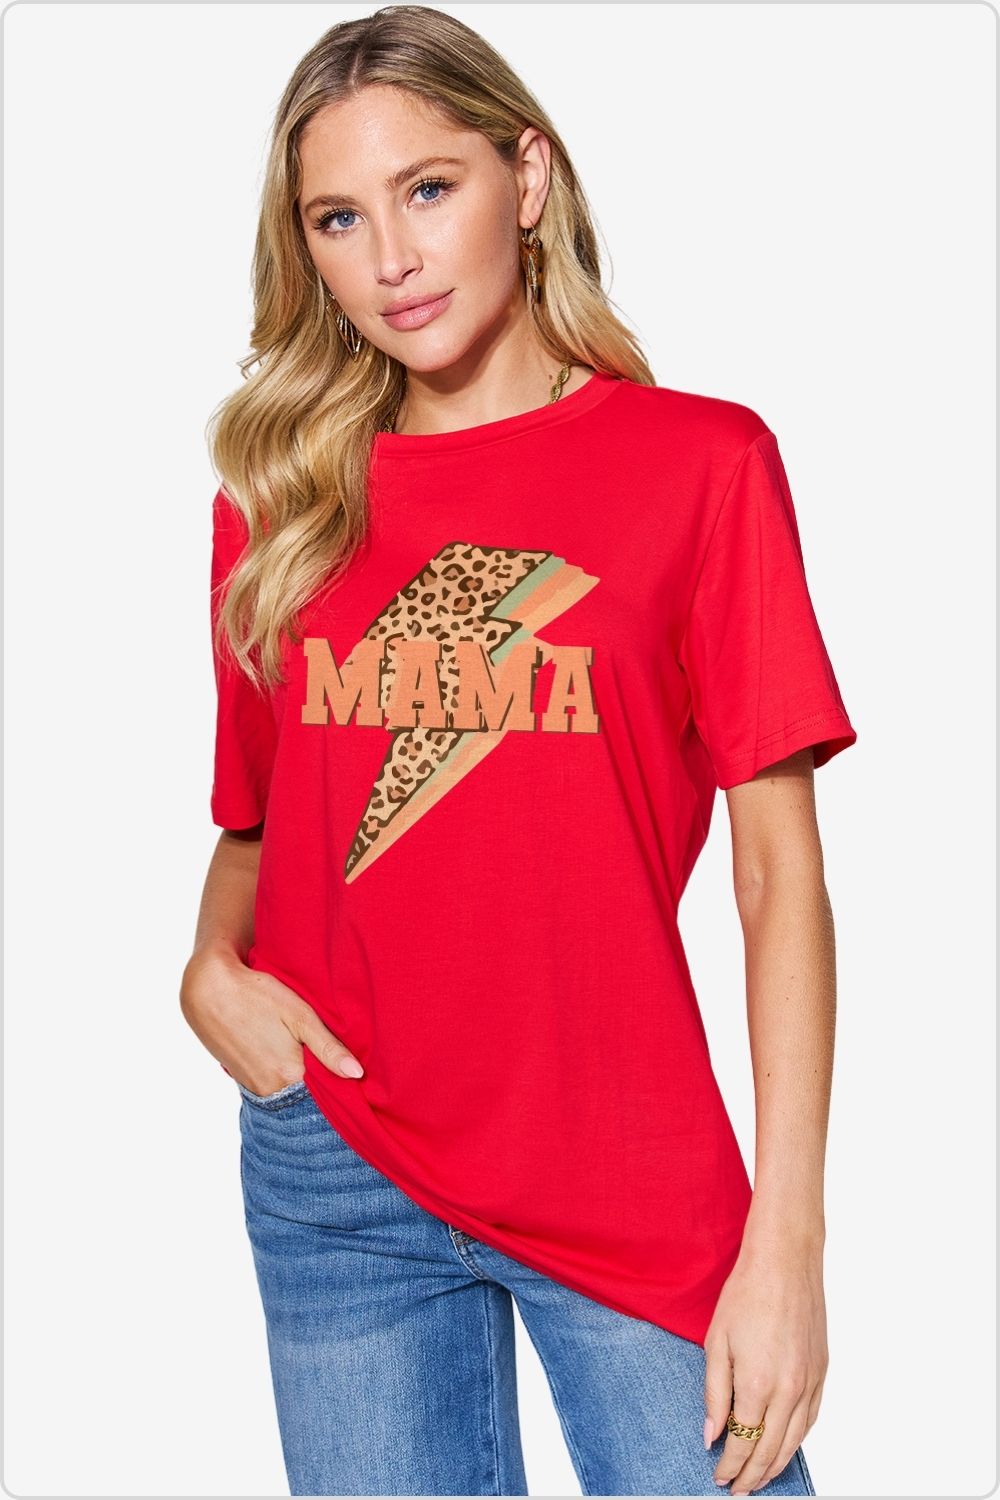 Stylish MAMA Graphic Cotton T-Shirt Front View, Red.